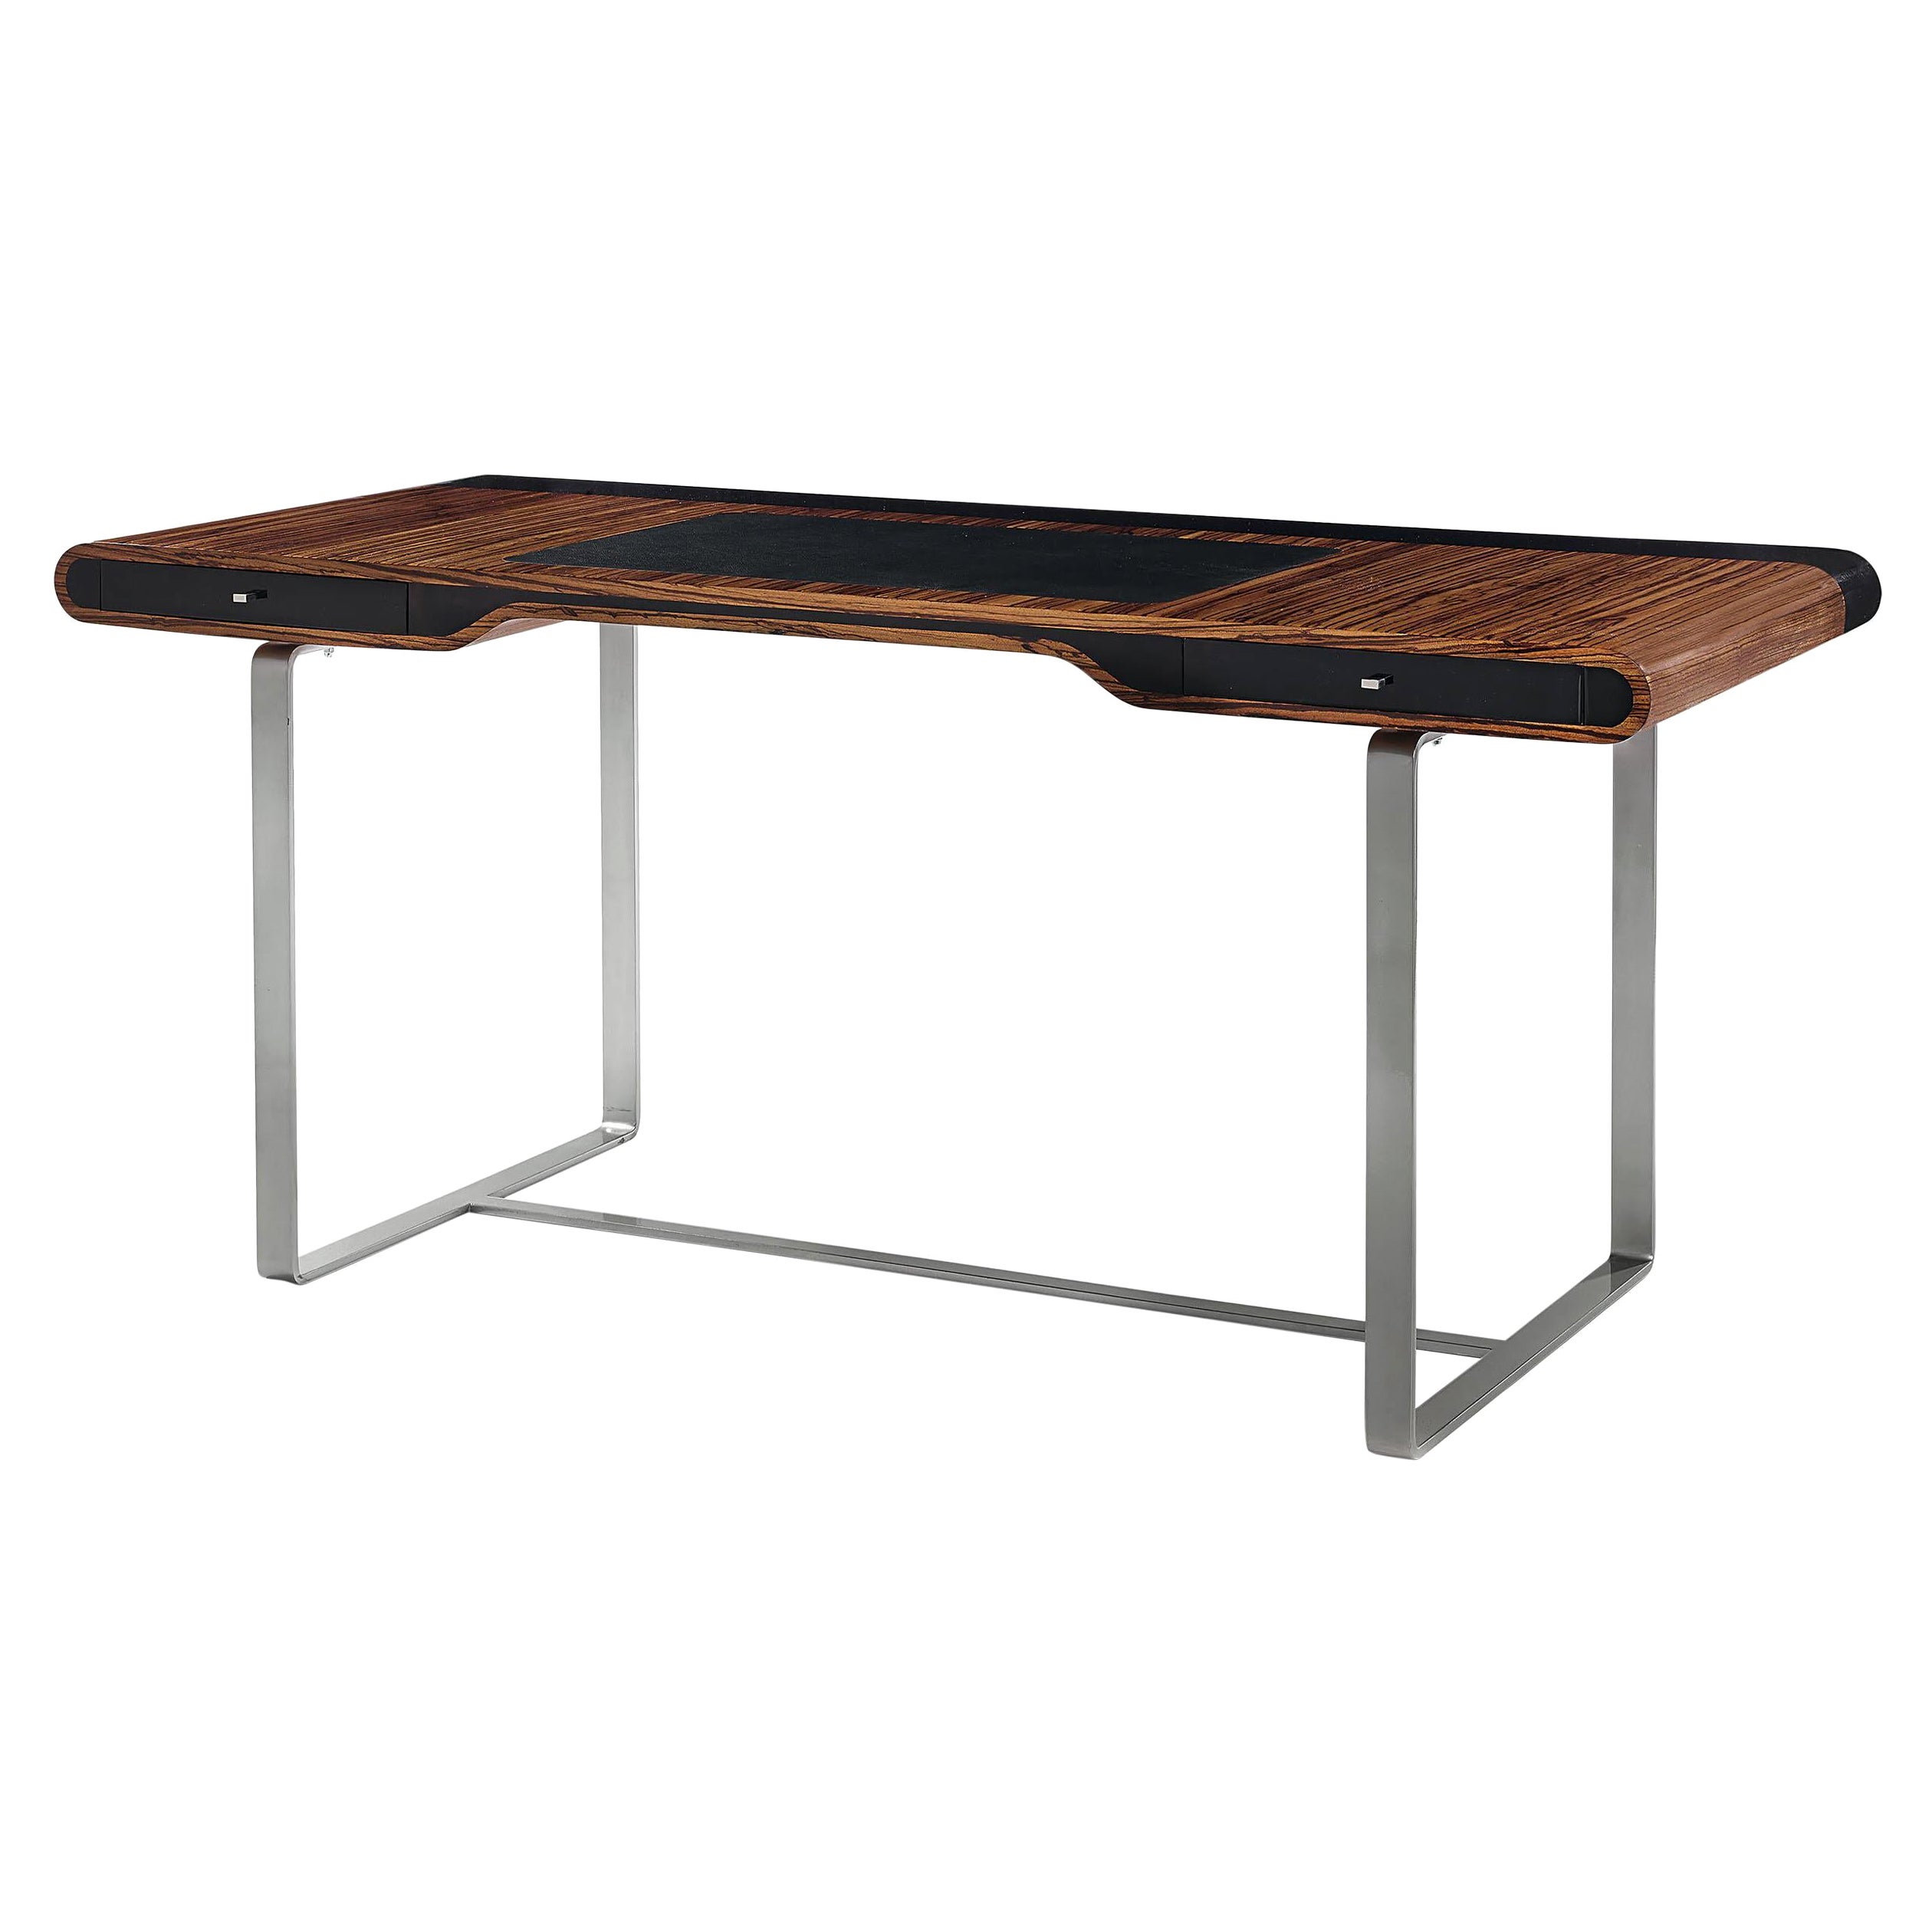 Little Shanghai Desk in Zebrano Wood and Black Sycomore Silver Painted Leg For Sale